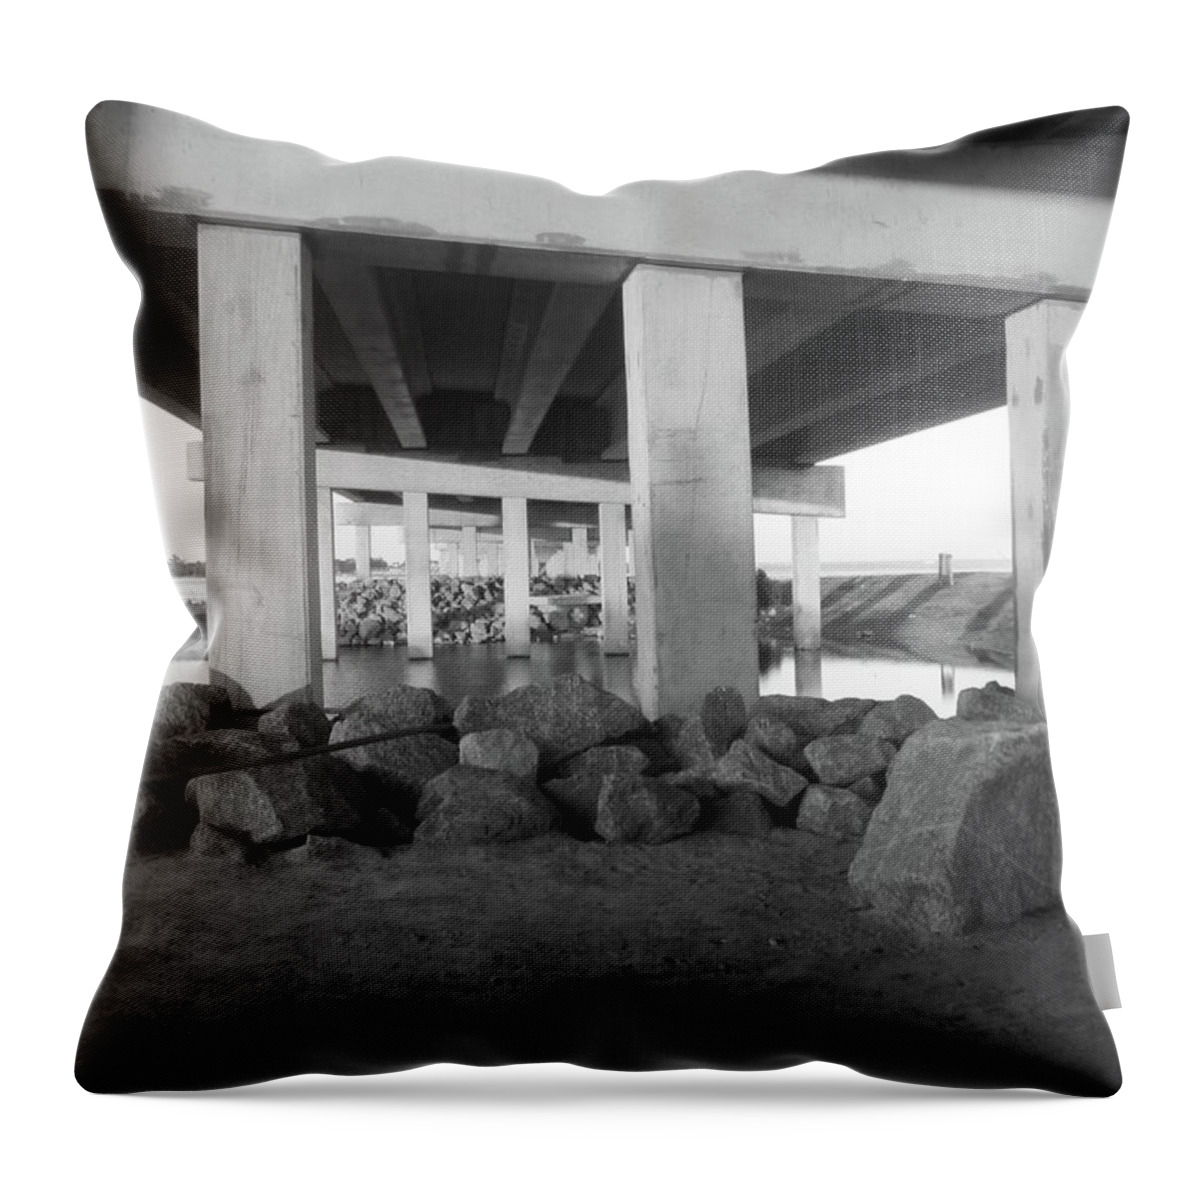 Bridge Throw Pillow featuring the photograph Bridge over nontroubled waters by WaLdEmAr BoRrErO